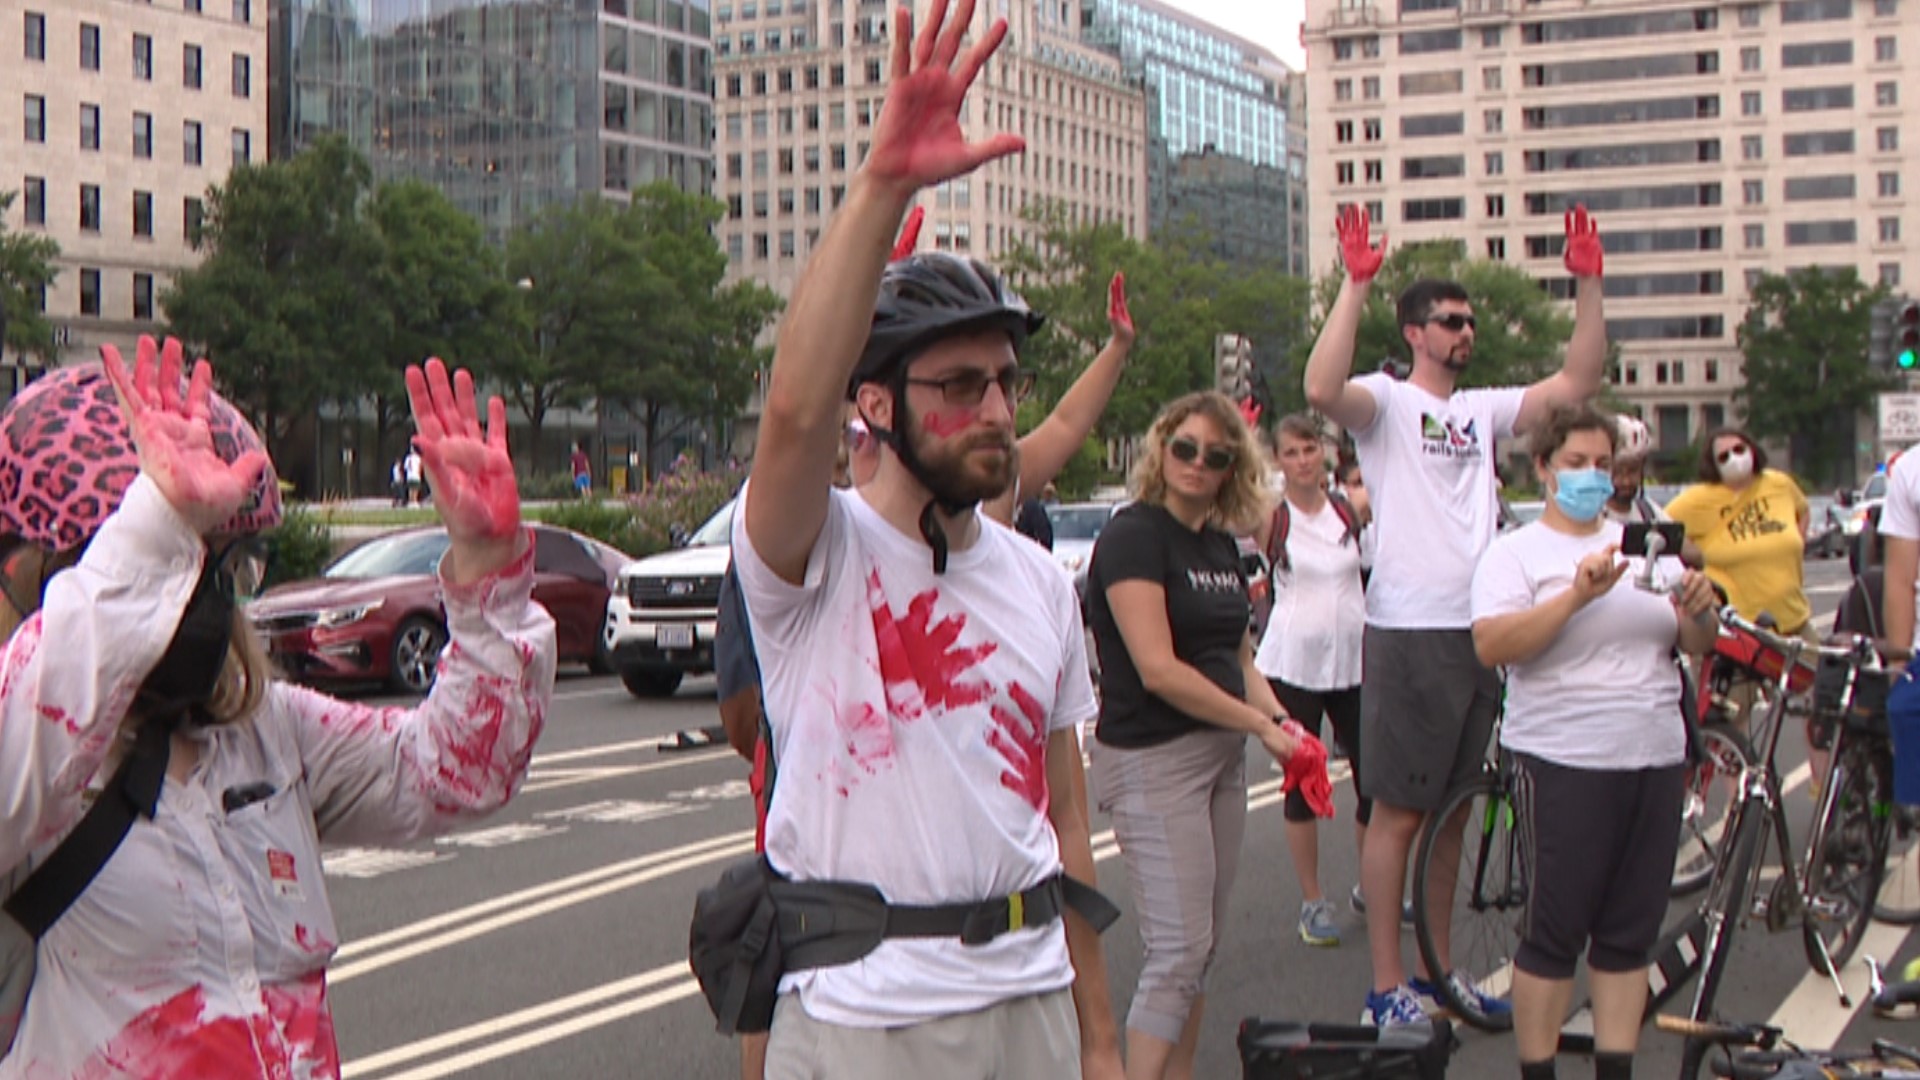 Dozens of bicycling and pedestrian advocates protested outside the Wilson Building.